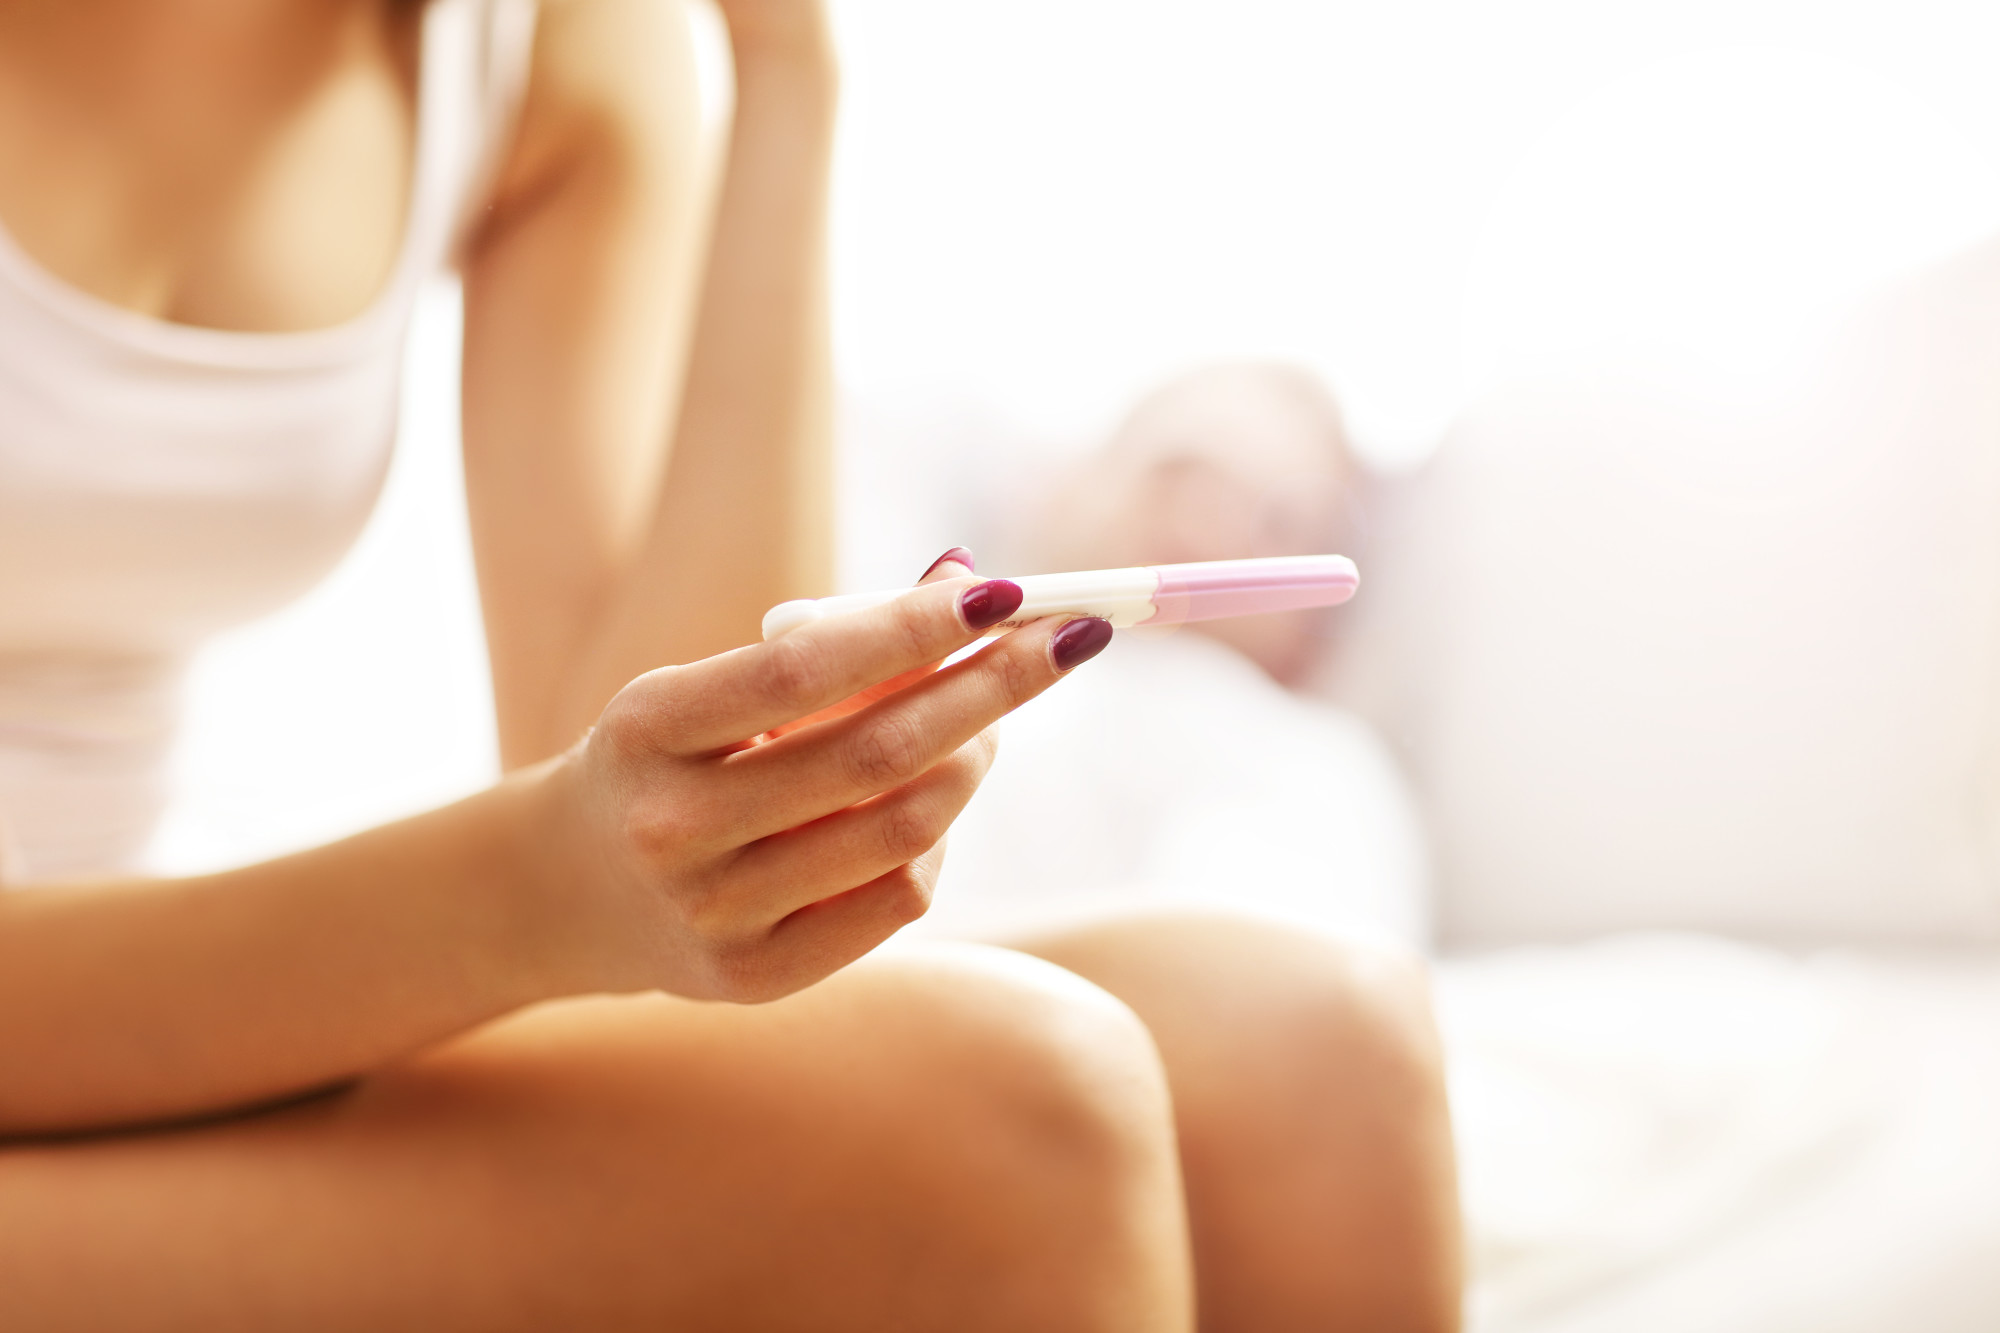 10 Best Ways to Go About Dealing with Infertility